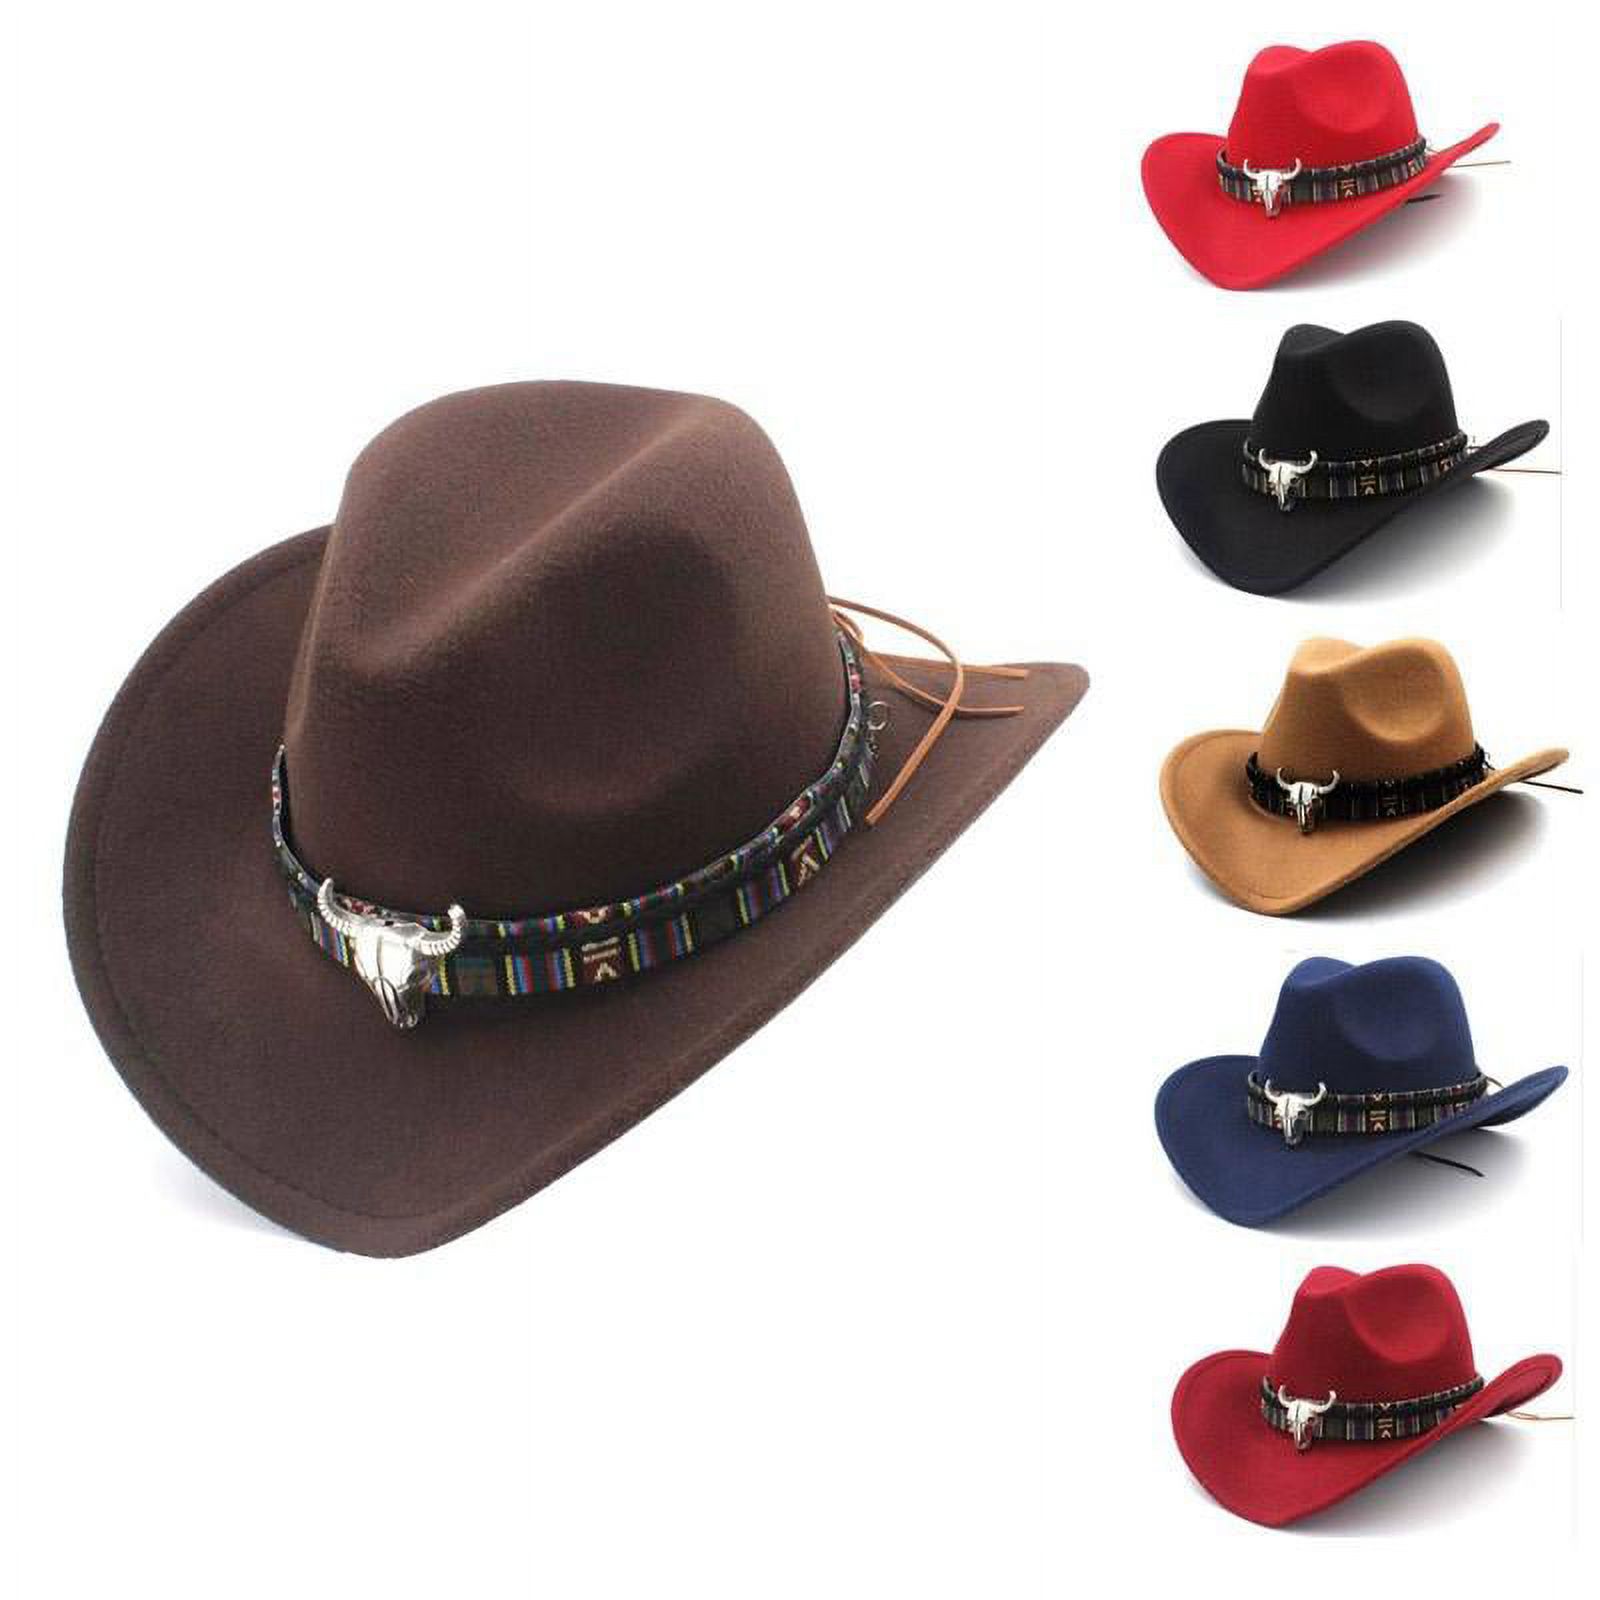 New Ethnic Style Western Cowboy Hat Women's Wool Hat Jazz Hat Western Cowboy Hat Wine Red - image 2 of 3